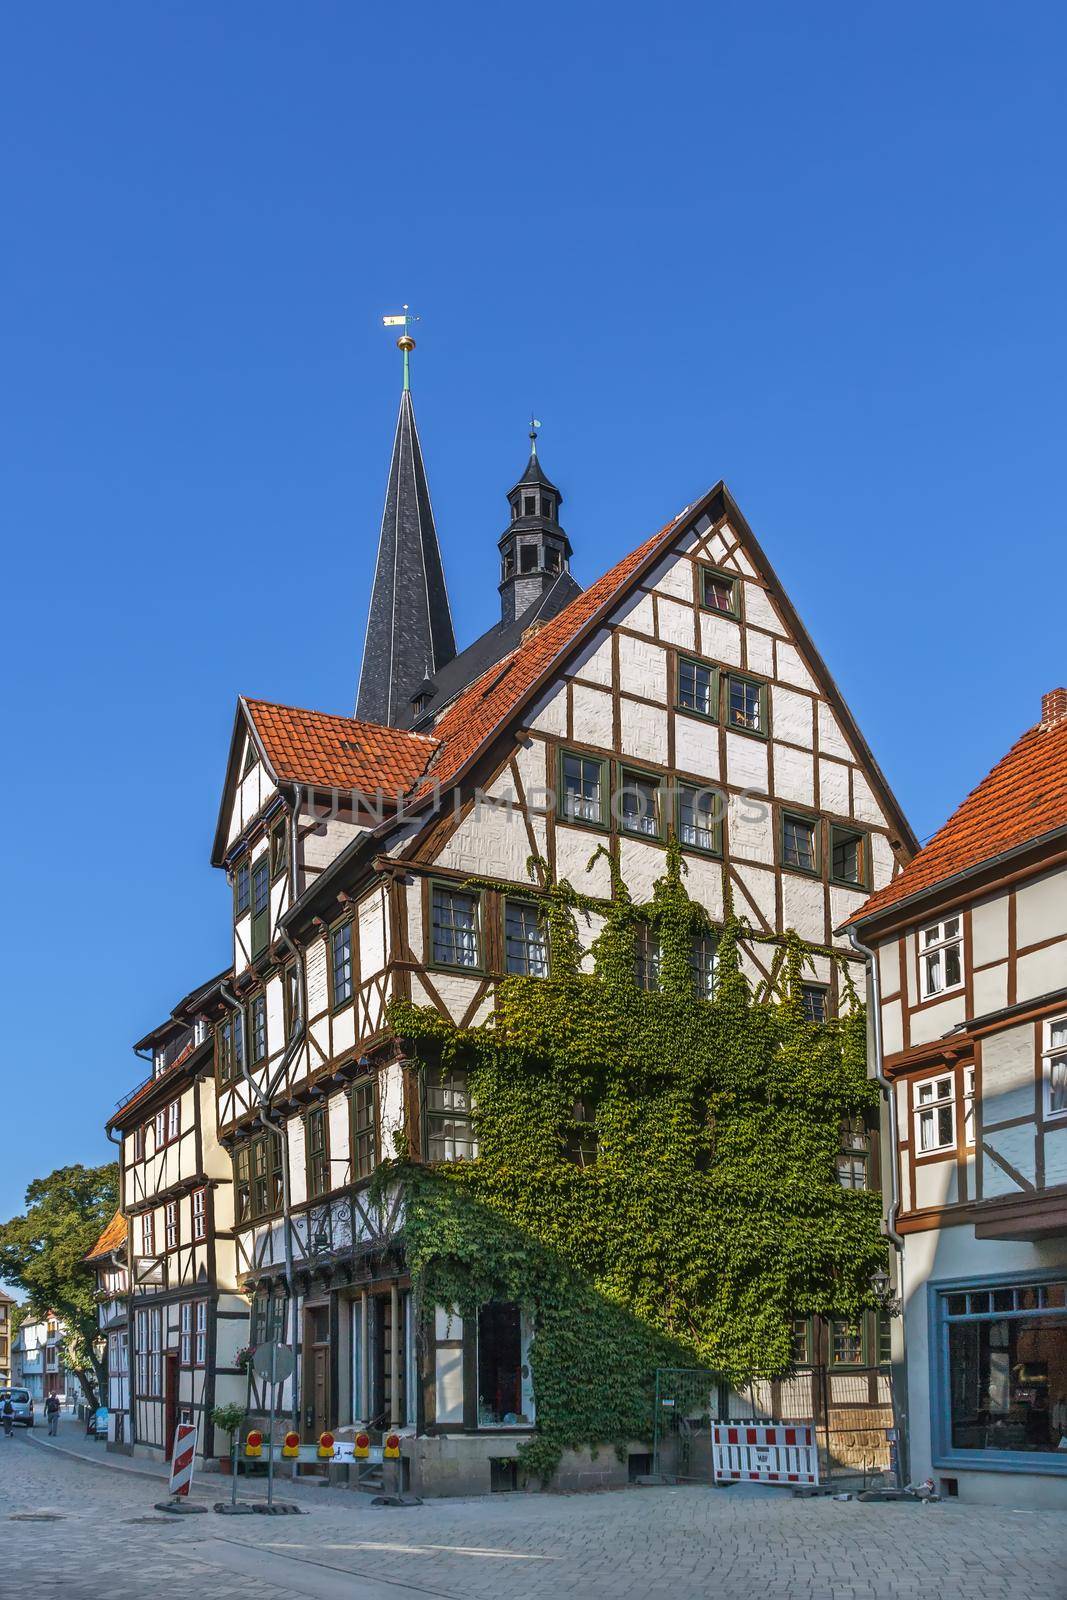 Street with half-timbered houses in Quedlinburg, Germany